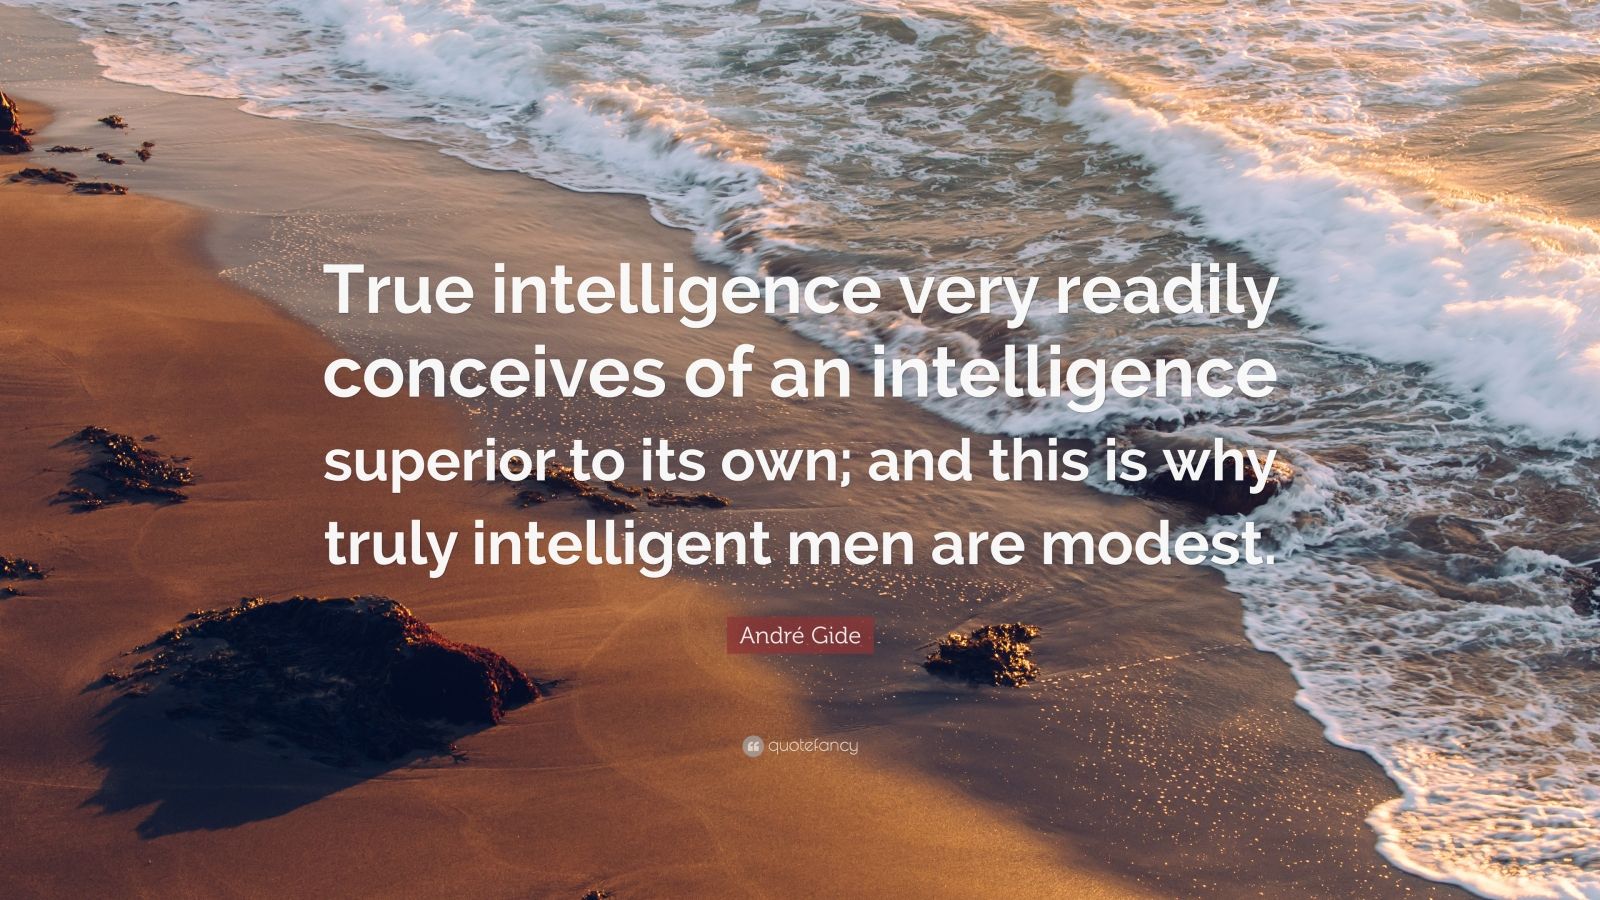 André Gide Quote: “True intelligence very readily conceives of an ...